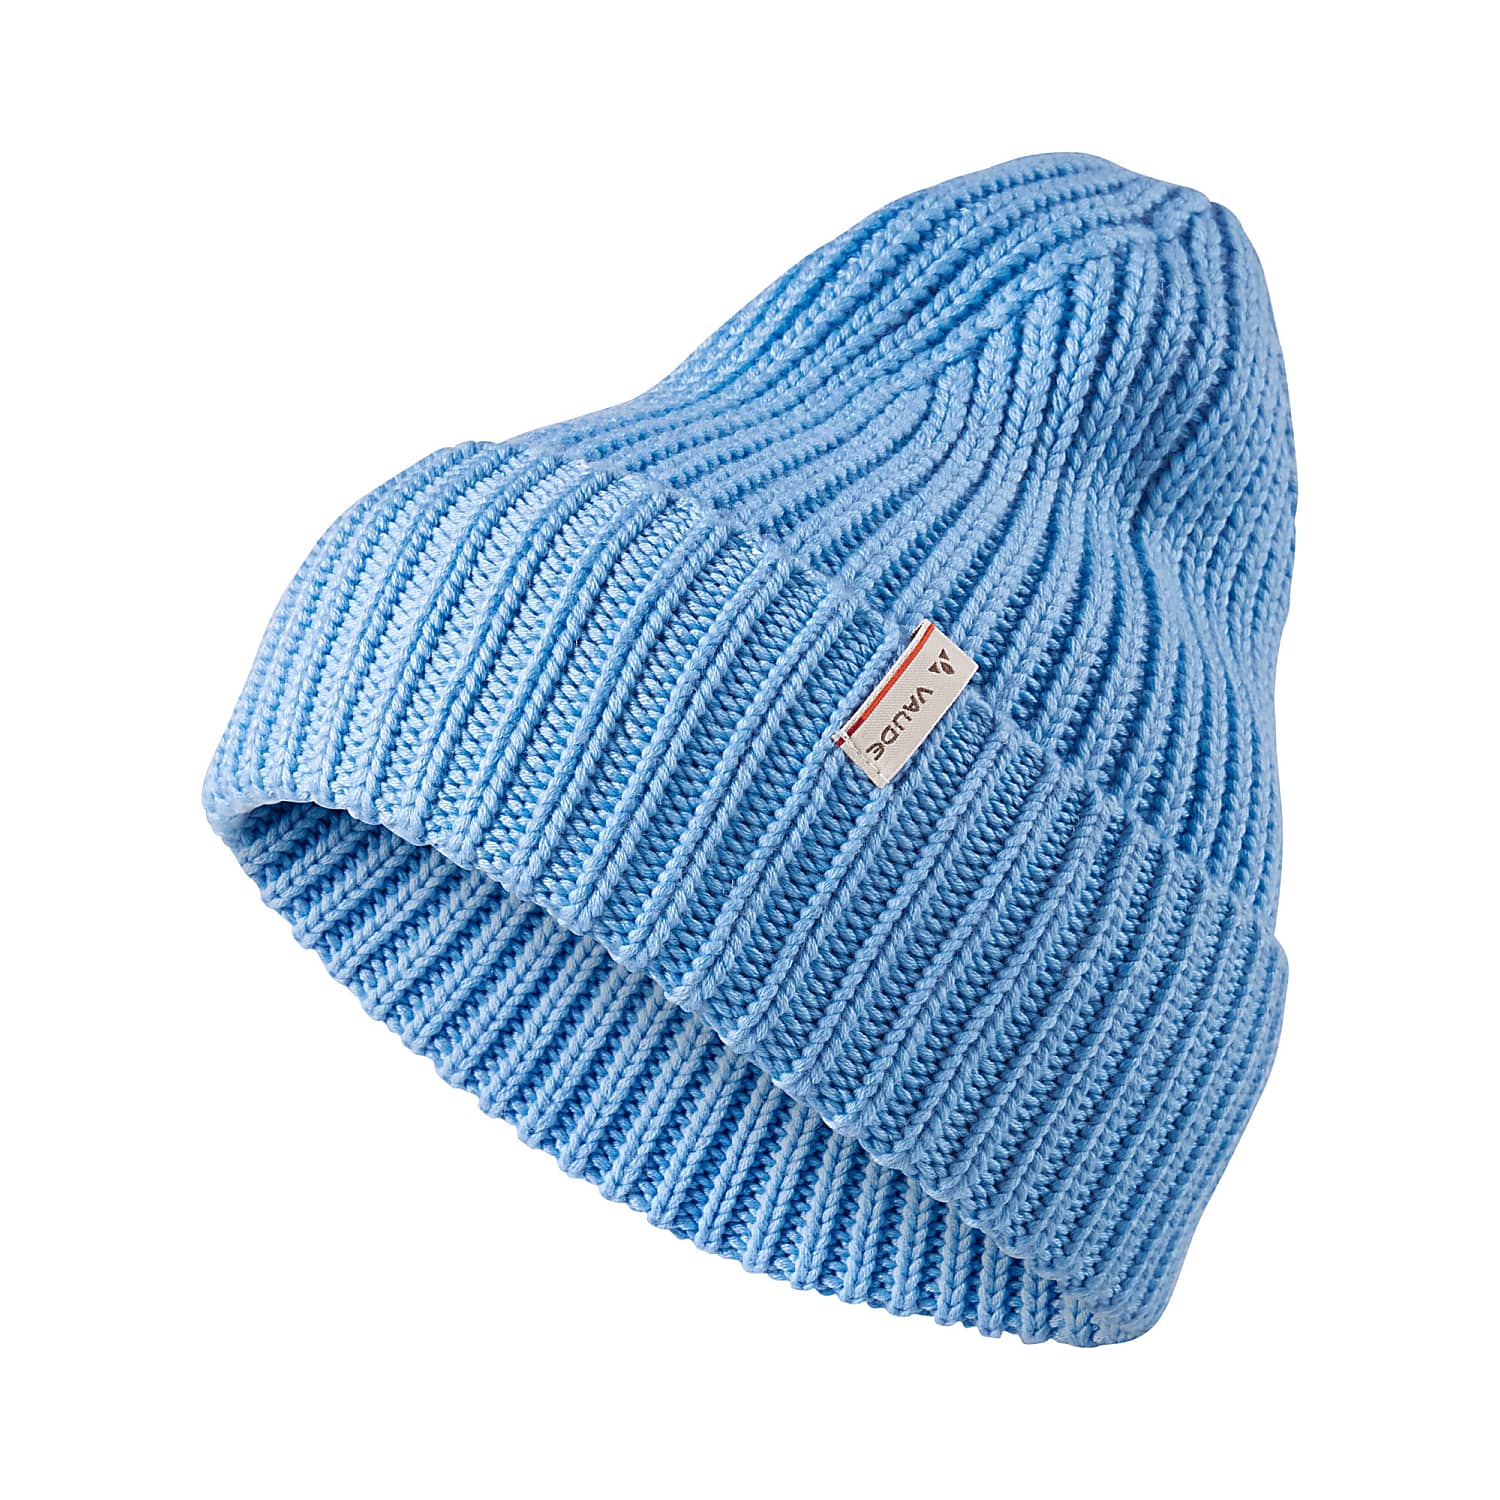 Vaude MOENA Blue BEANIE II, - Fast Pastel cheap shipping and